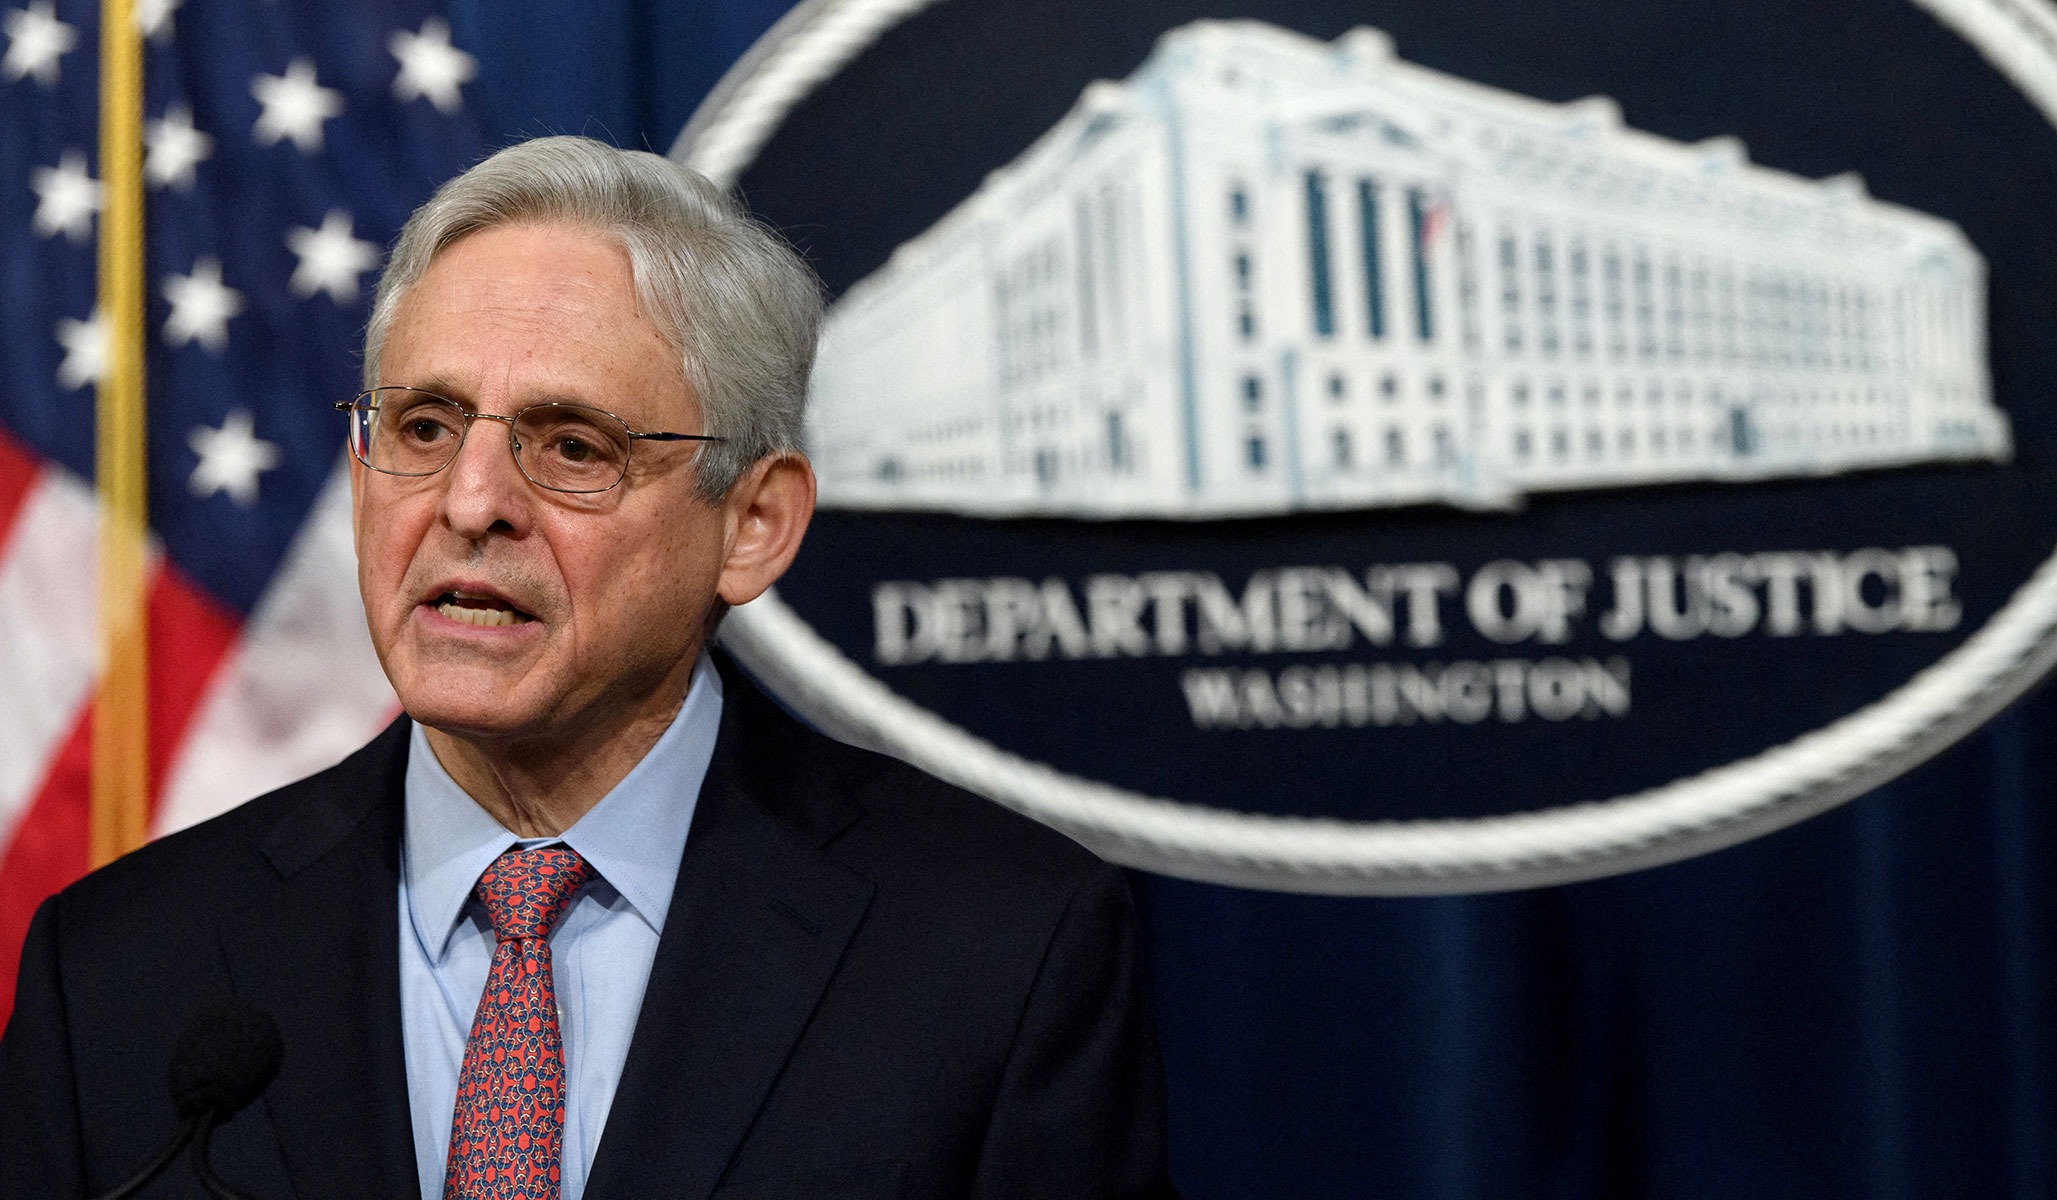 www.nationalreview.com: Merrick Garland’s Justice Department One Year Later